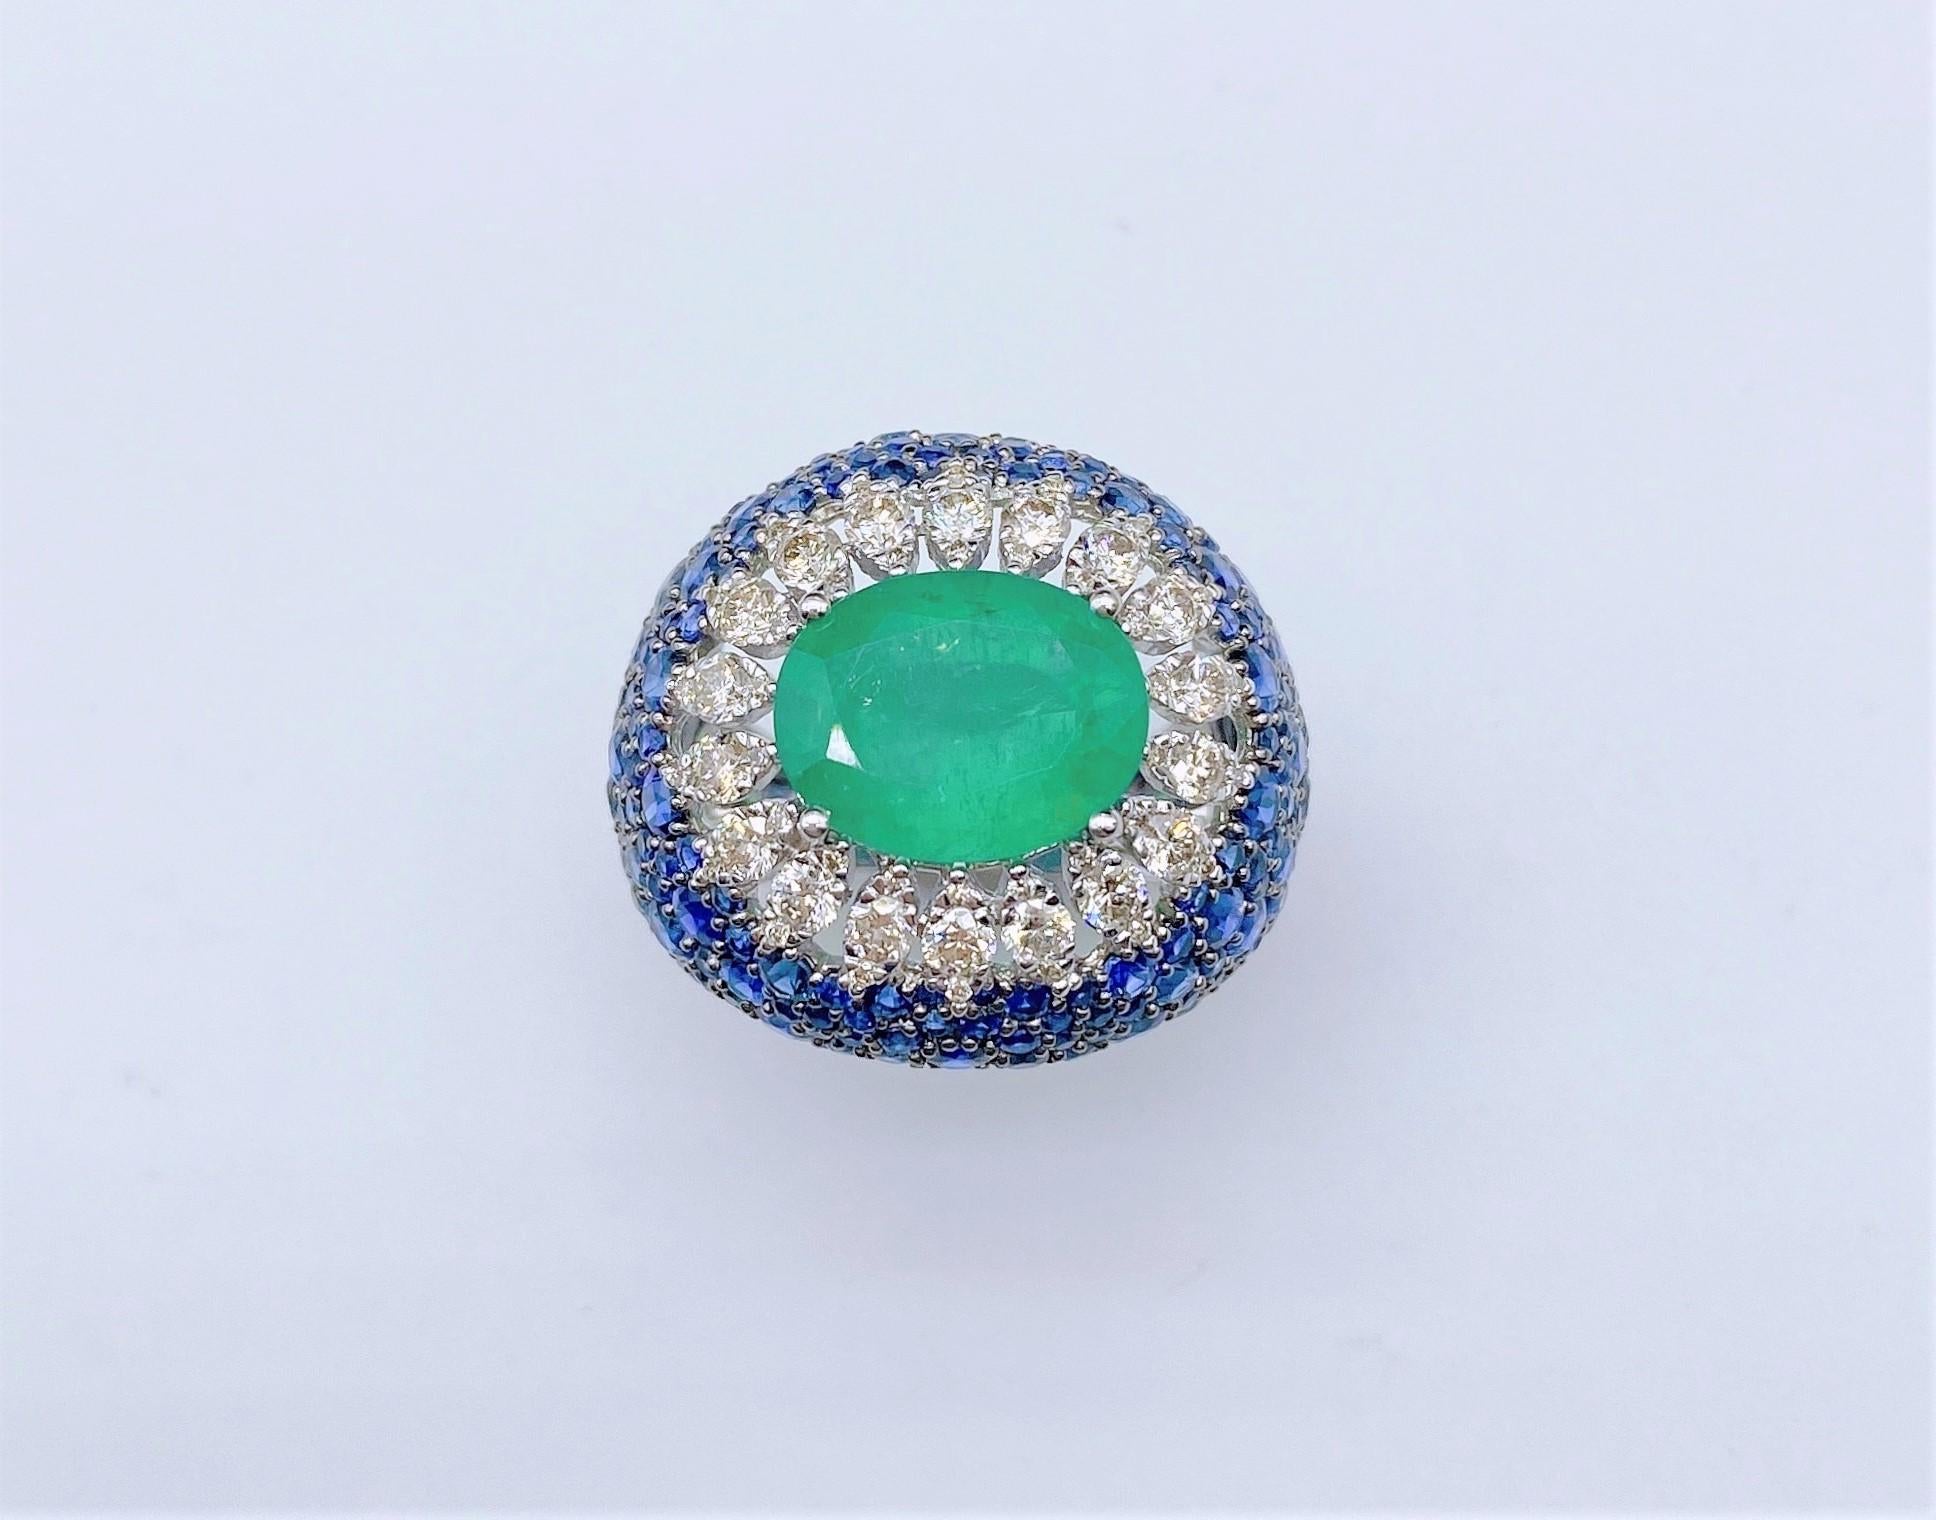 The Following Item we are offering is a Rare Important Radiant 18KT Gold Large Fancy Glittering Emerald, Blue Sapphire, and Diamond Ring. Ring is comprised of A LARGE Gorgeous Fancy Emerald sitting atop Beautiful Glittering Fancy Blue Sapphires